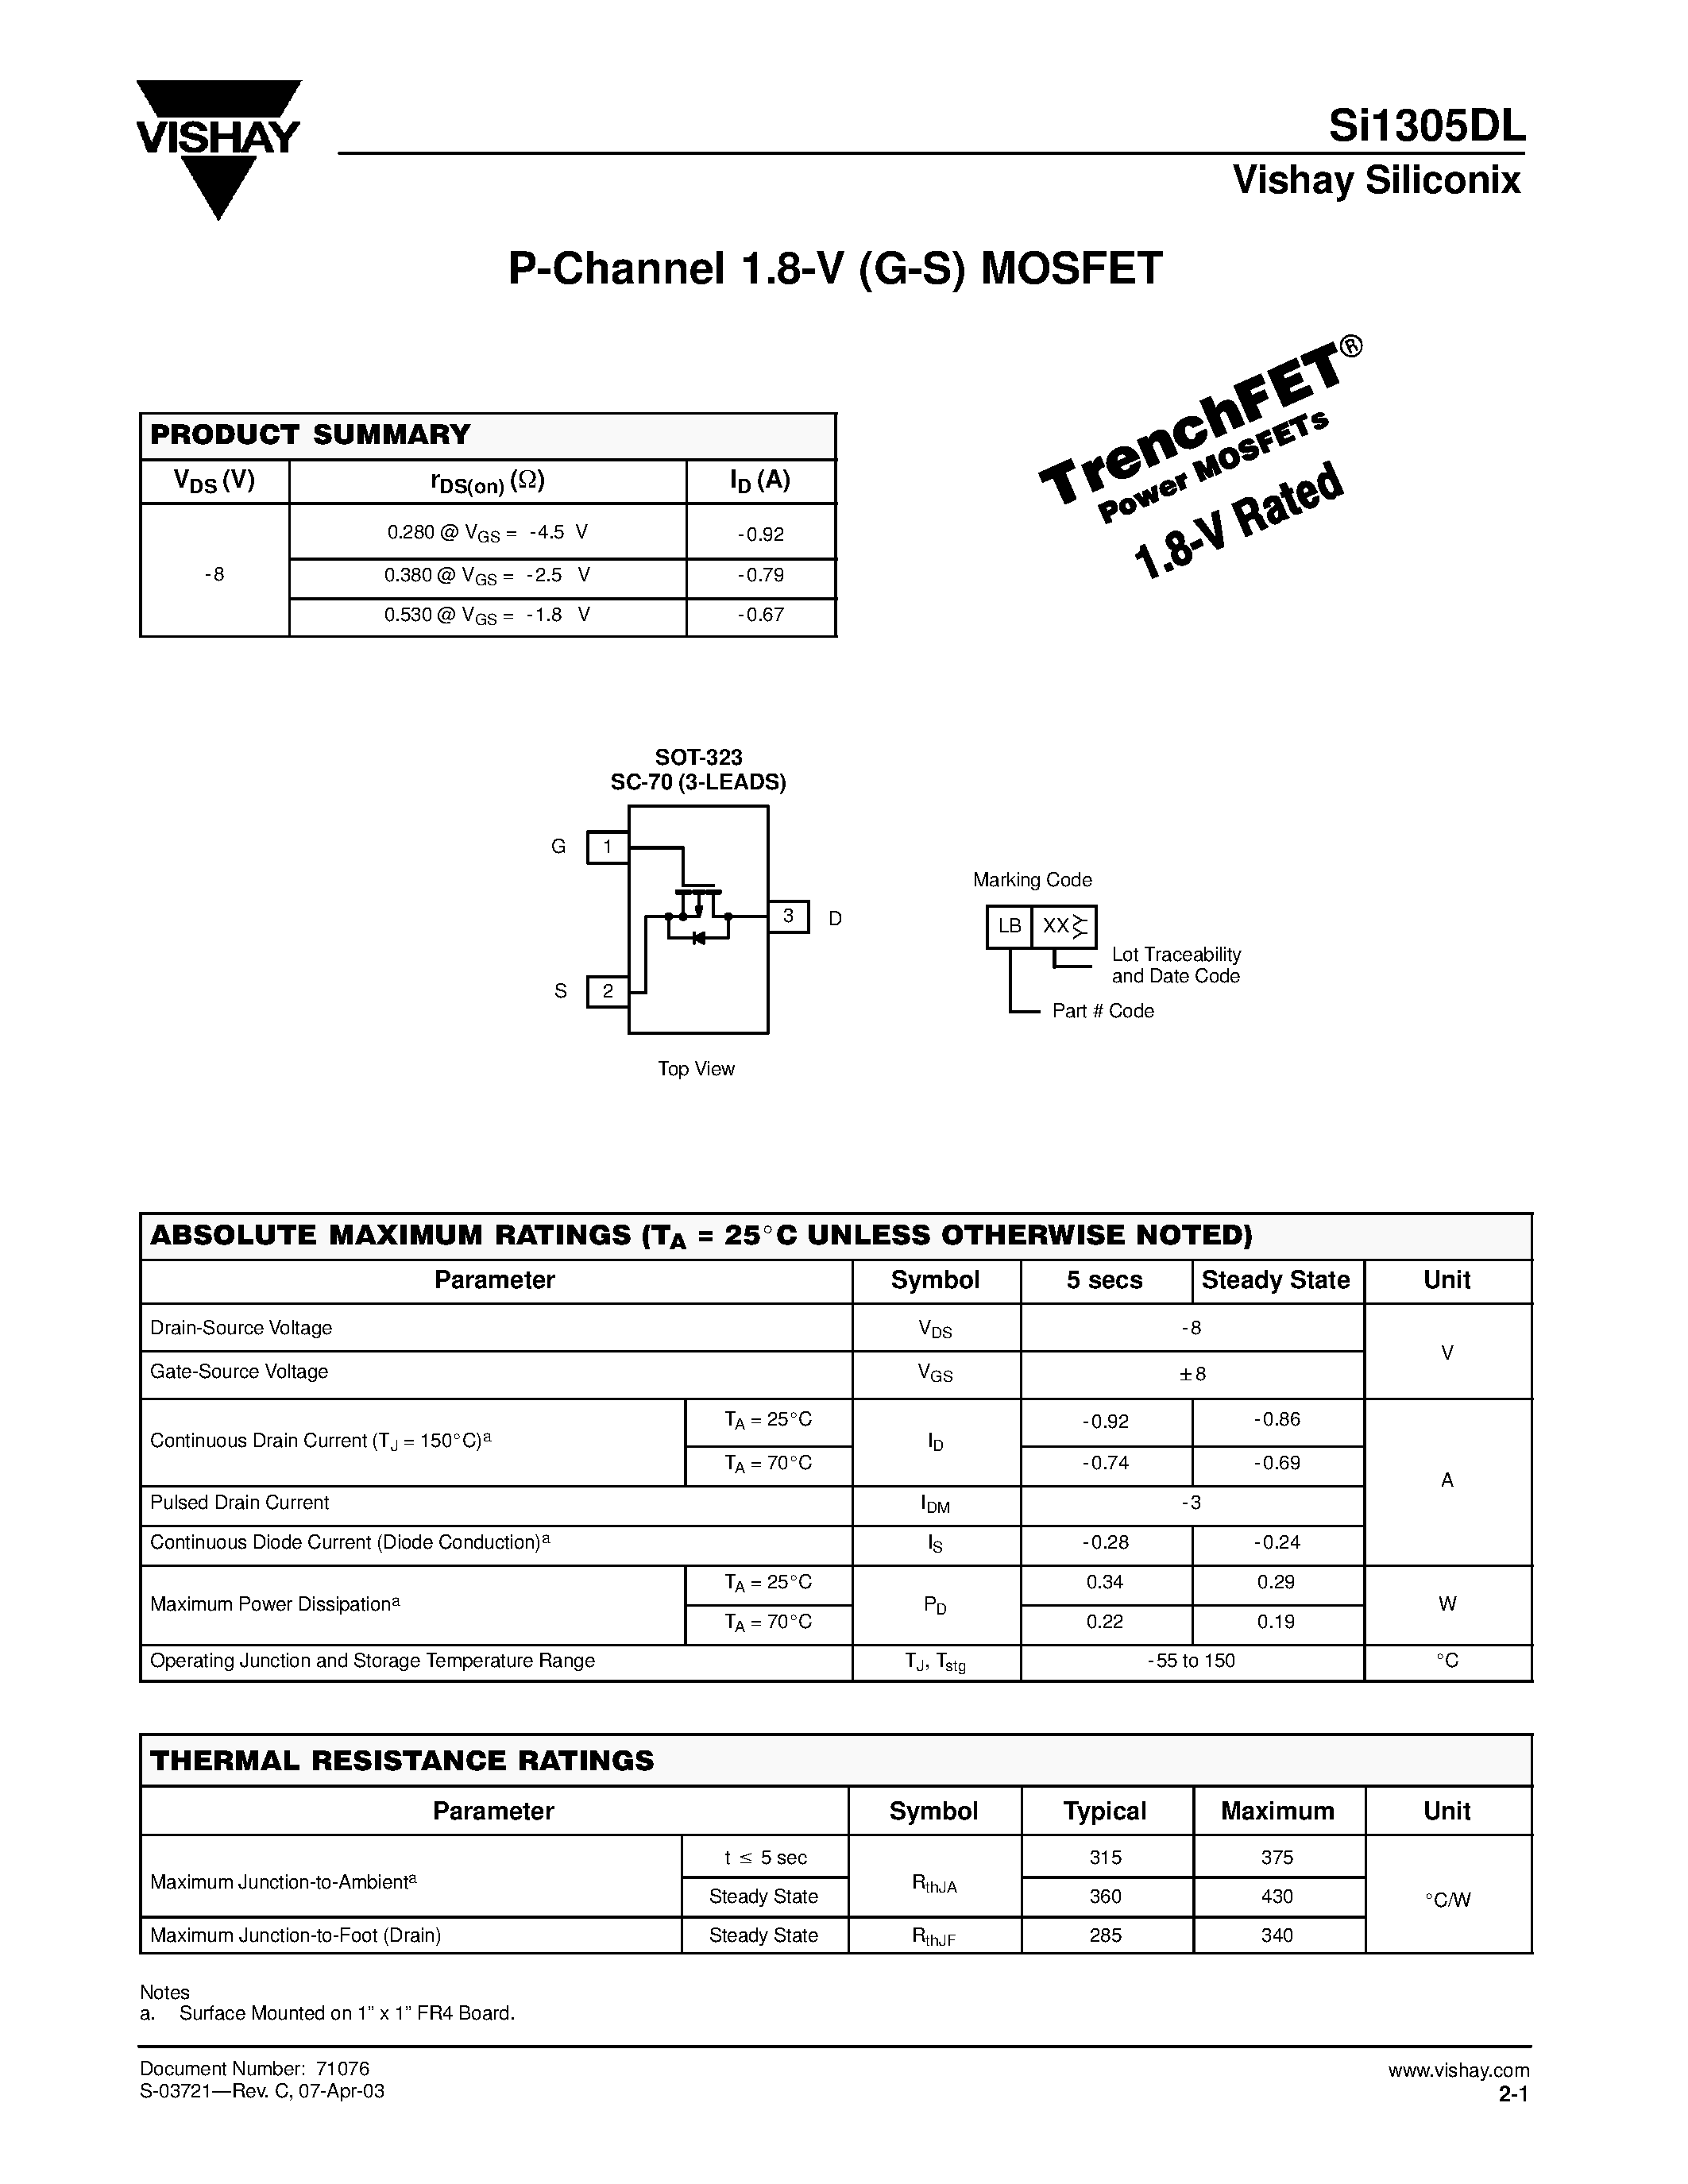 Datasheet SI1305DL - P-Channel 1.8-V (G-S) MOSFET page 1